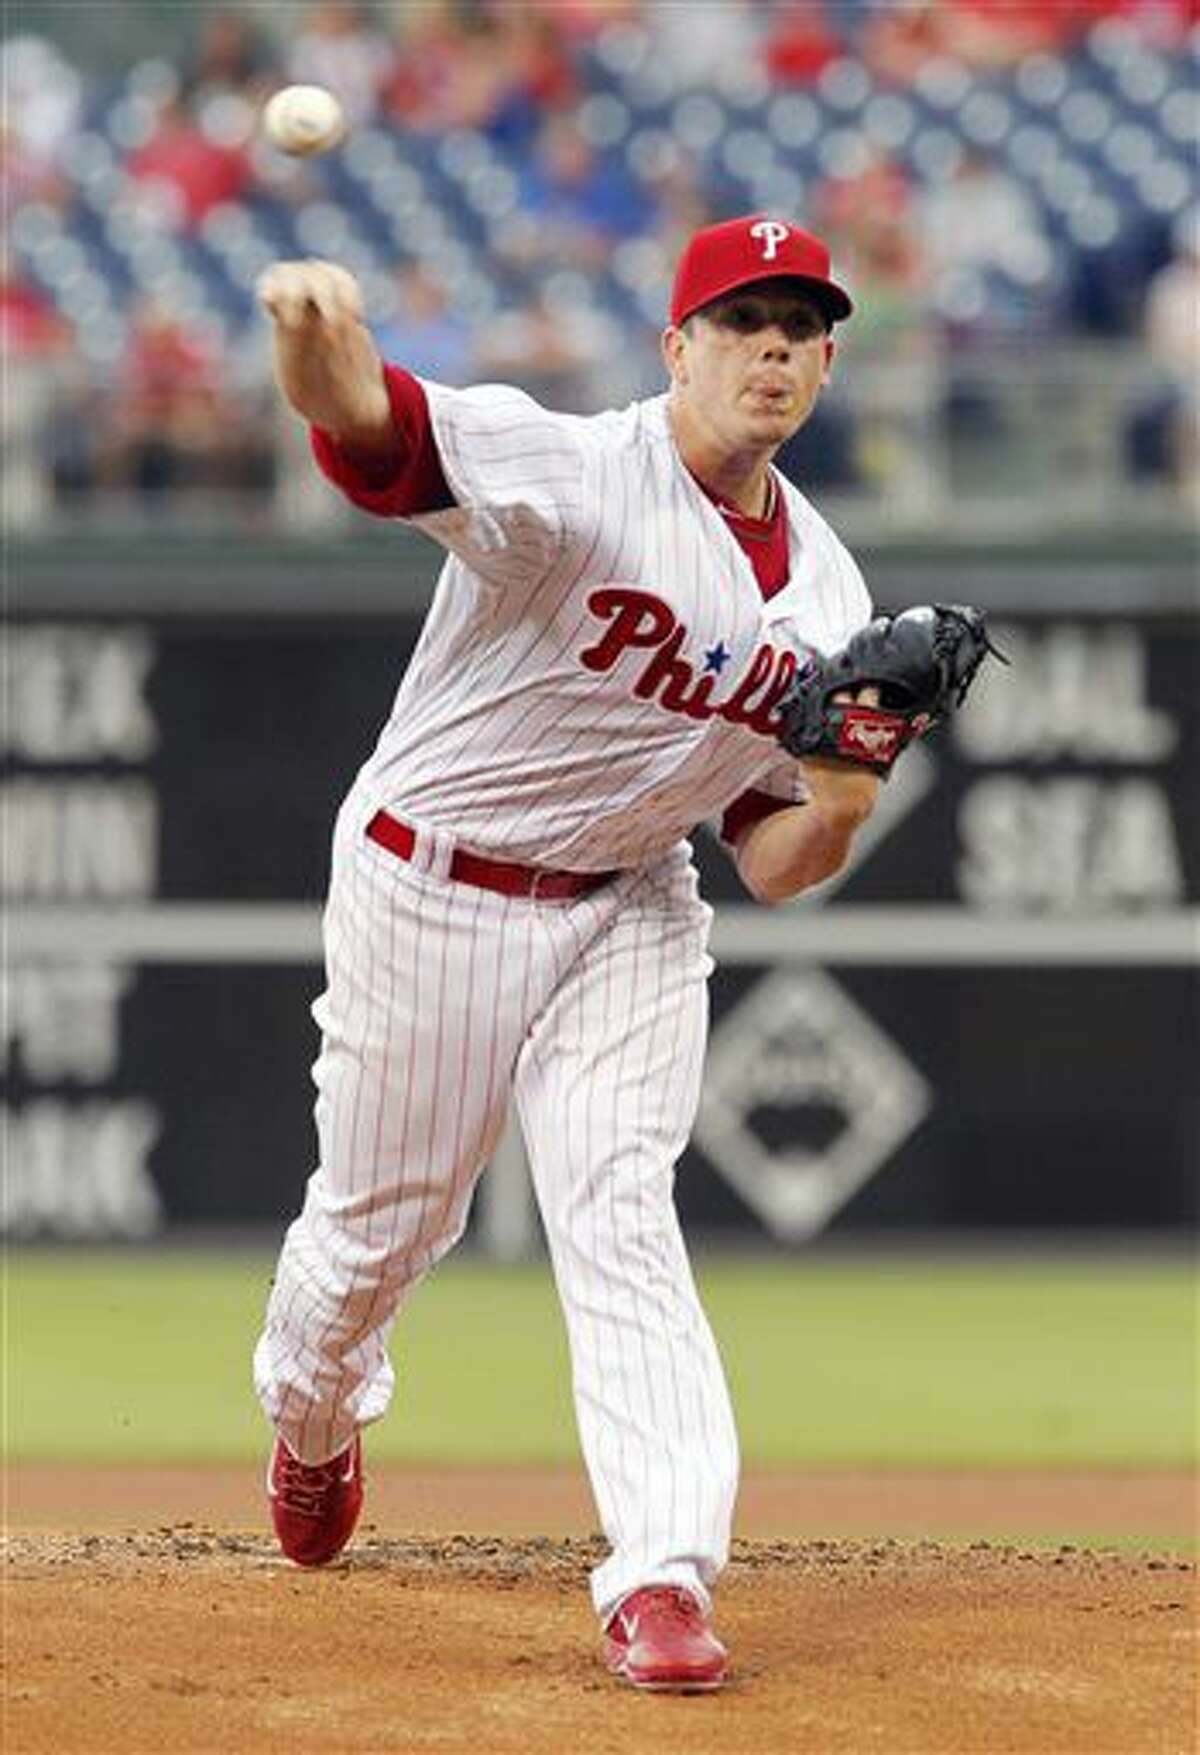 Philadelphia Phillies starting pitcher Jeremy Hellickson throws during the first inning of a baseball game against the Kansas City Royals, Friday, July 1, 2016 in Philadelphia. (AP Photo/Tom Mihalek)